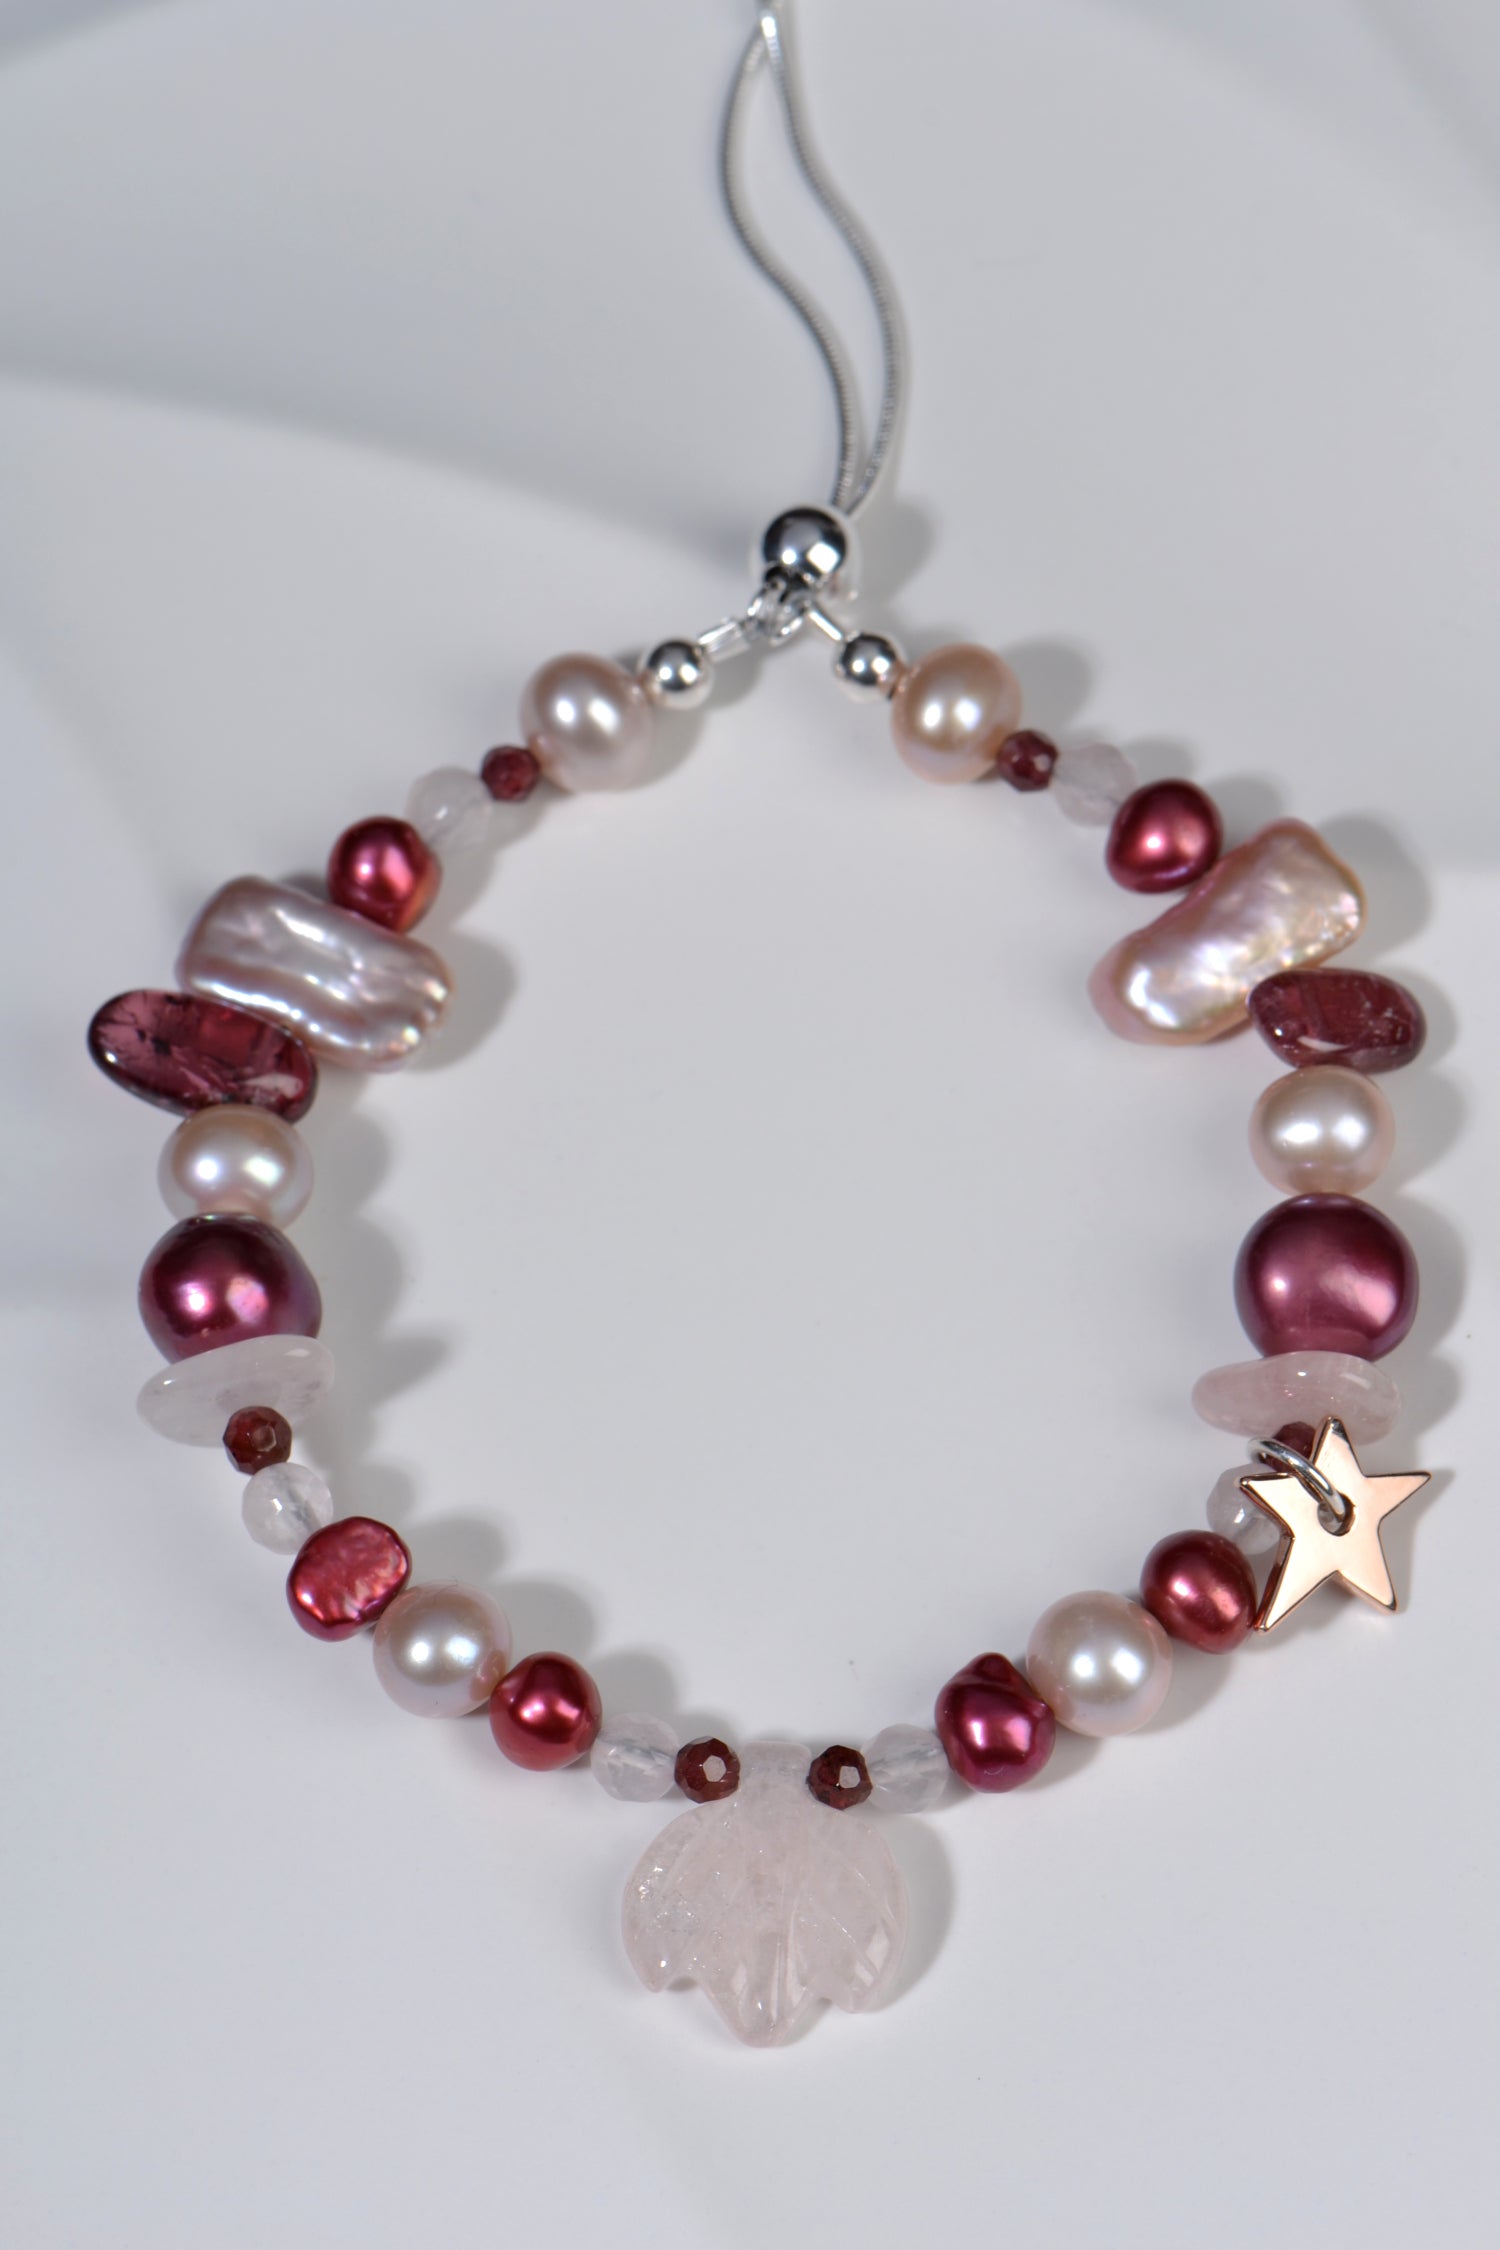 designer bracelet with pink and raspberry pearls and gemstones